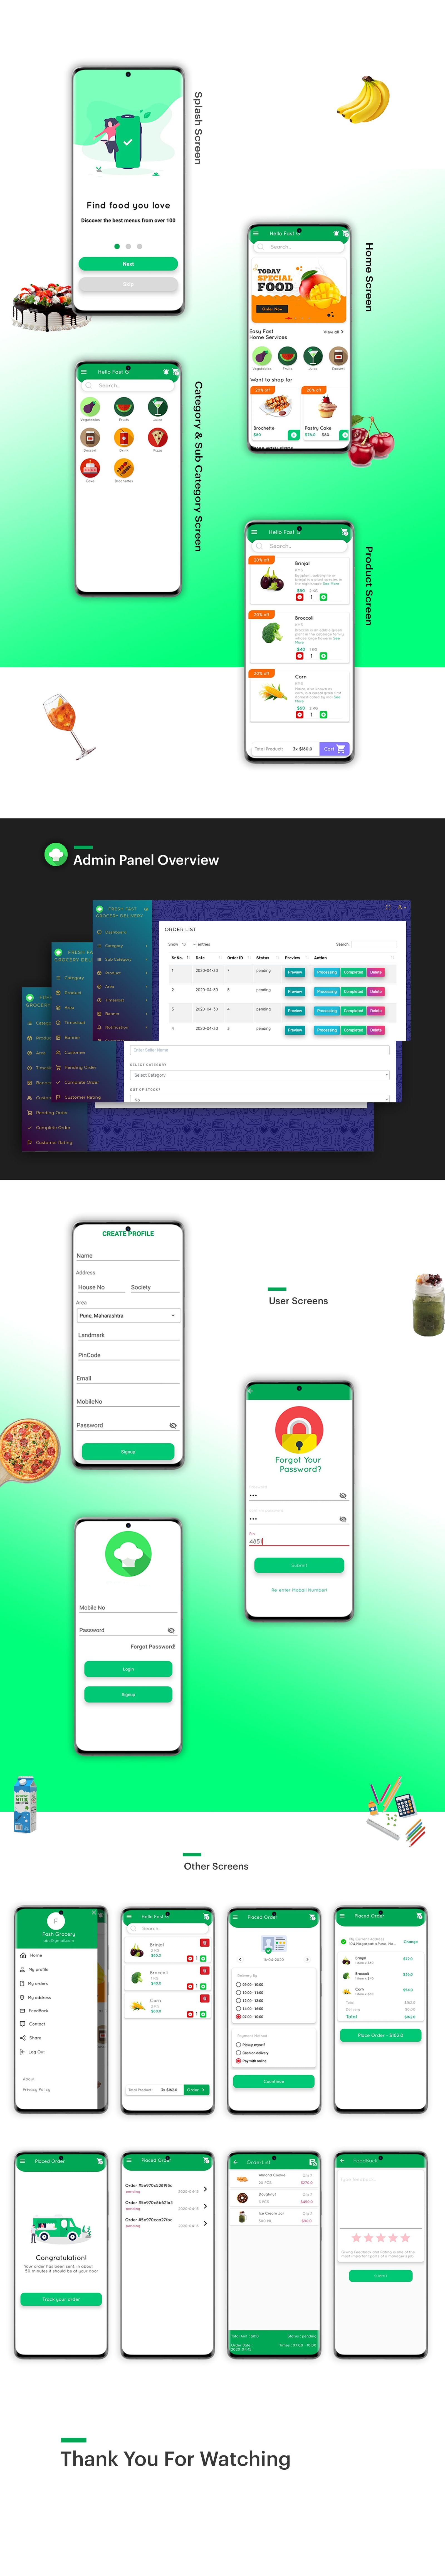 Fresh Fast Grocery Delivery Native Android App with Interactive Admin Panel v1.2 - 7